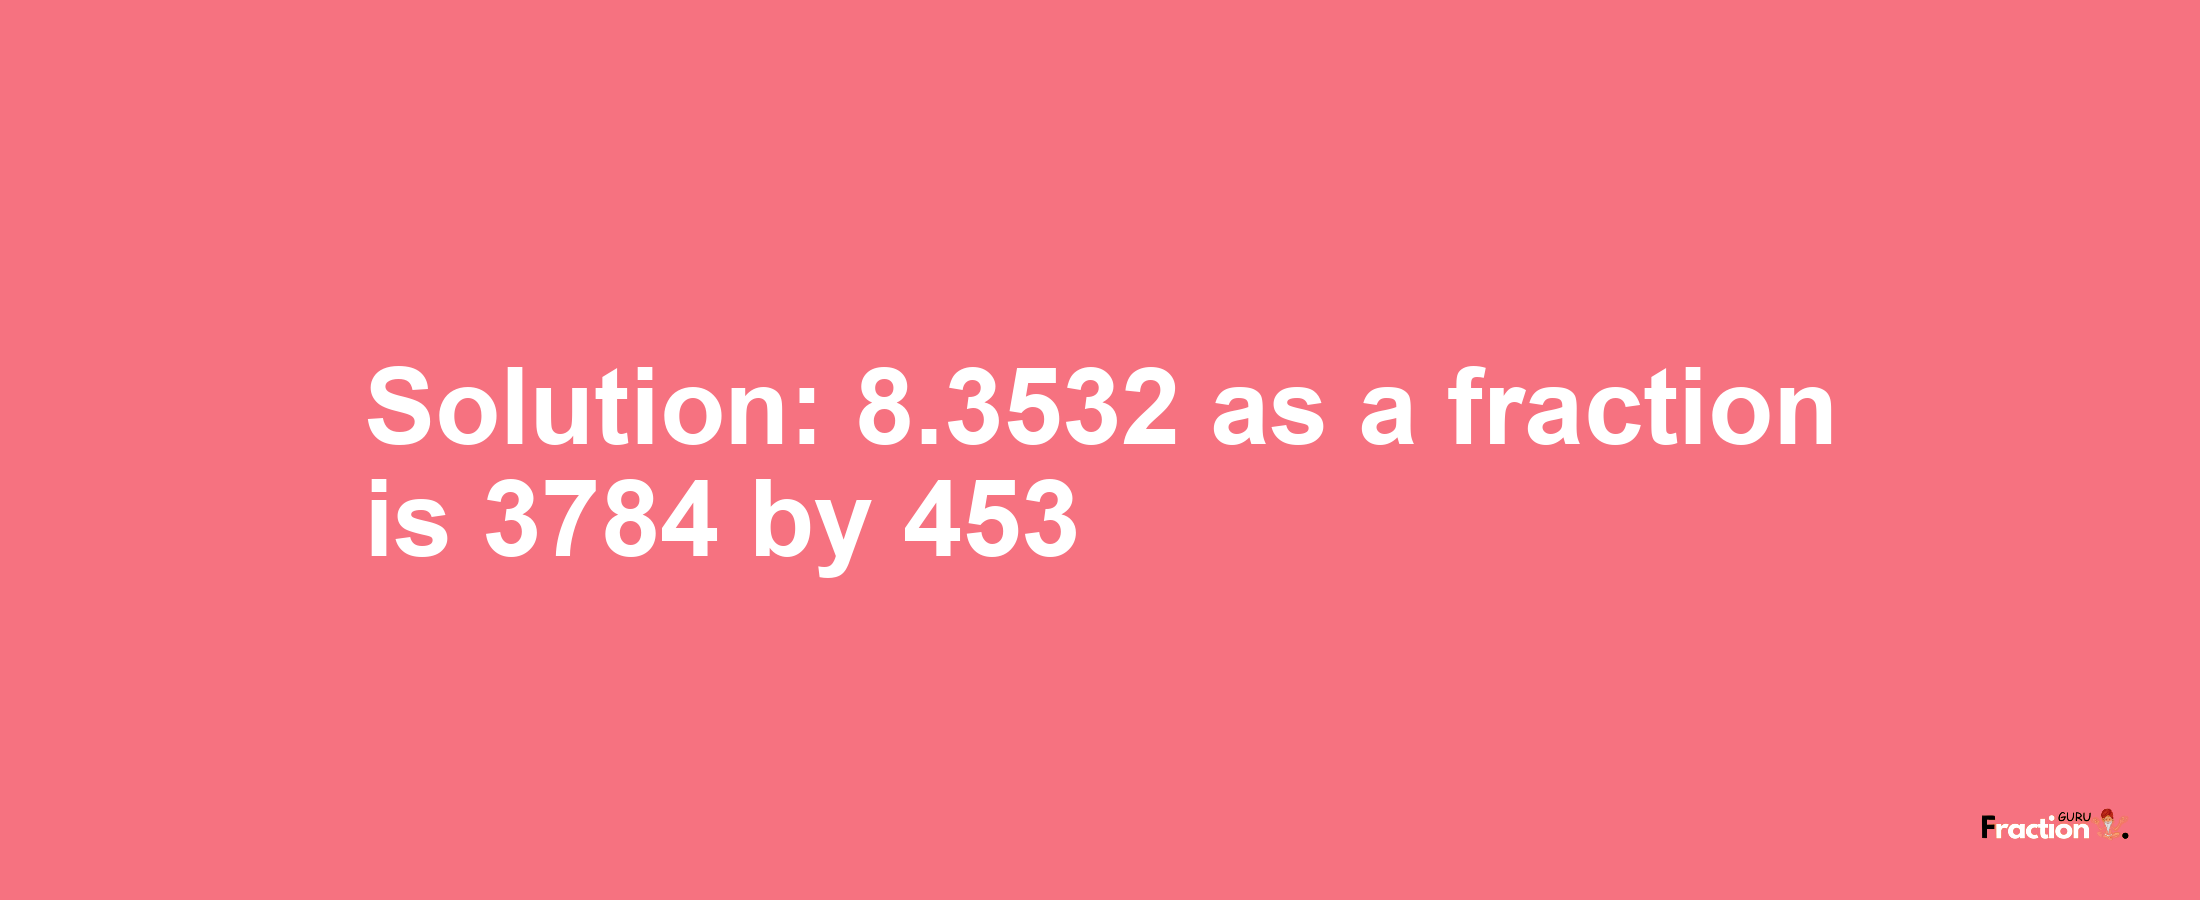 Solution:8.3532 as a fraction is 3784/453